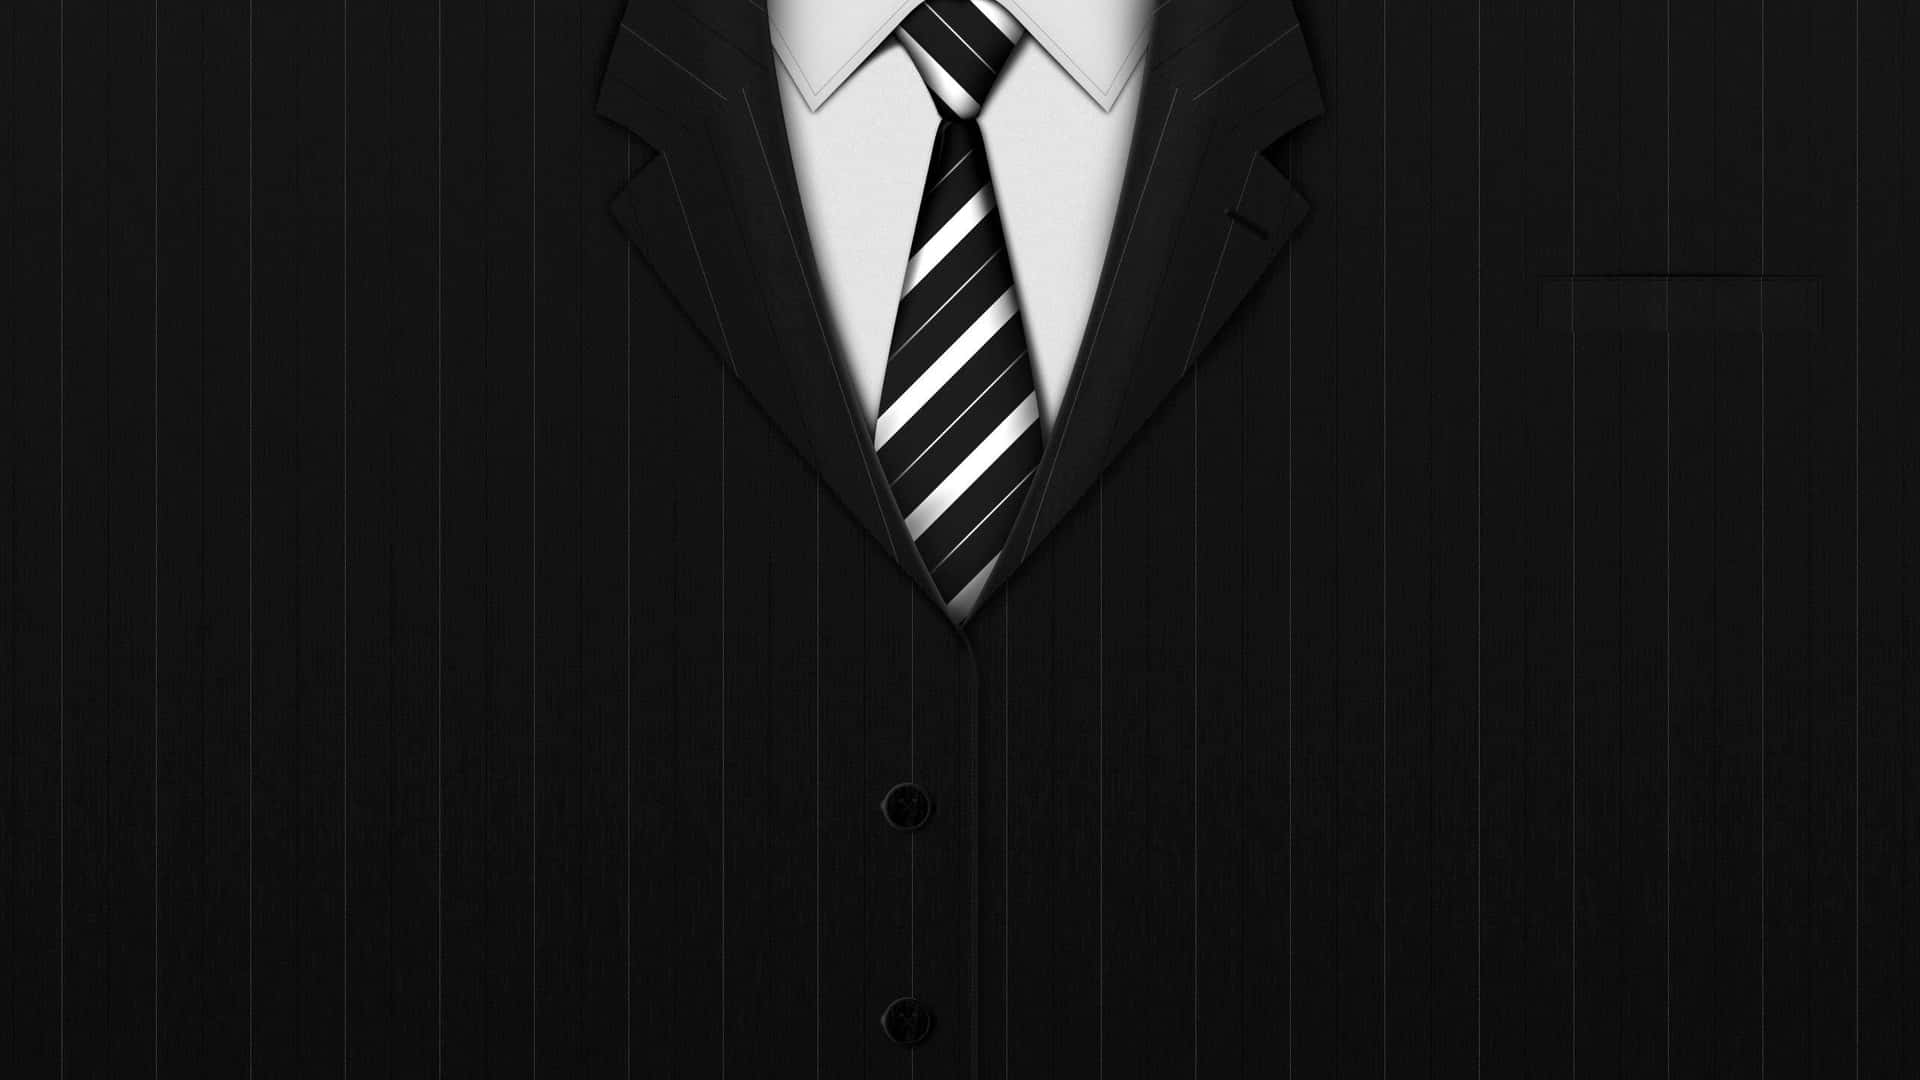 A Black Suit With A White Tie